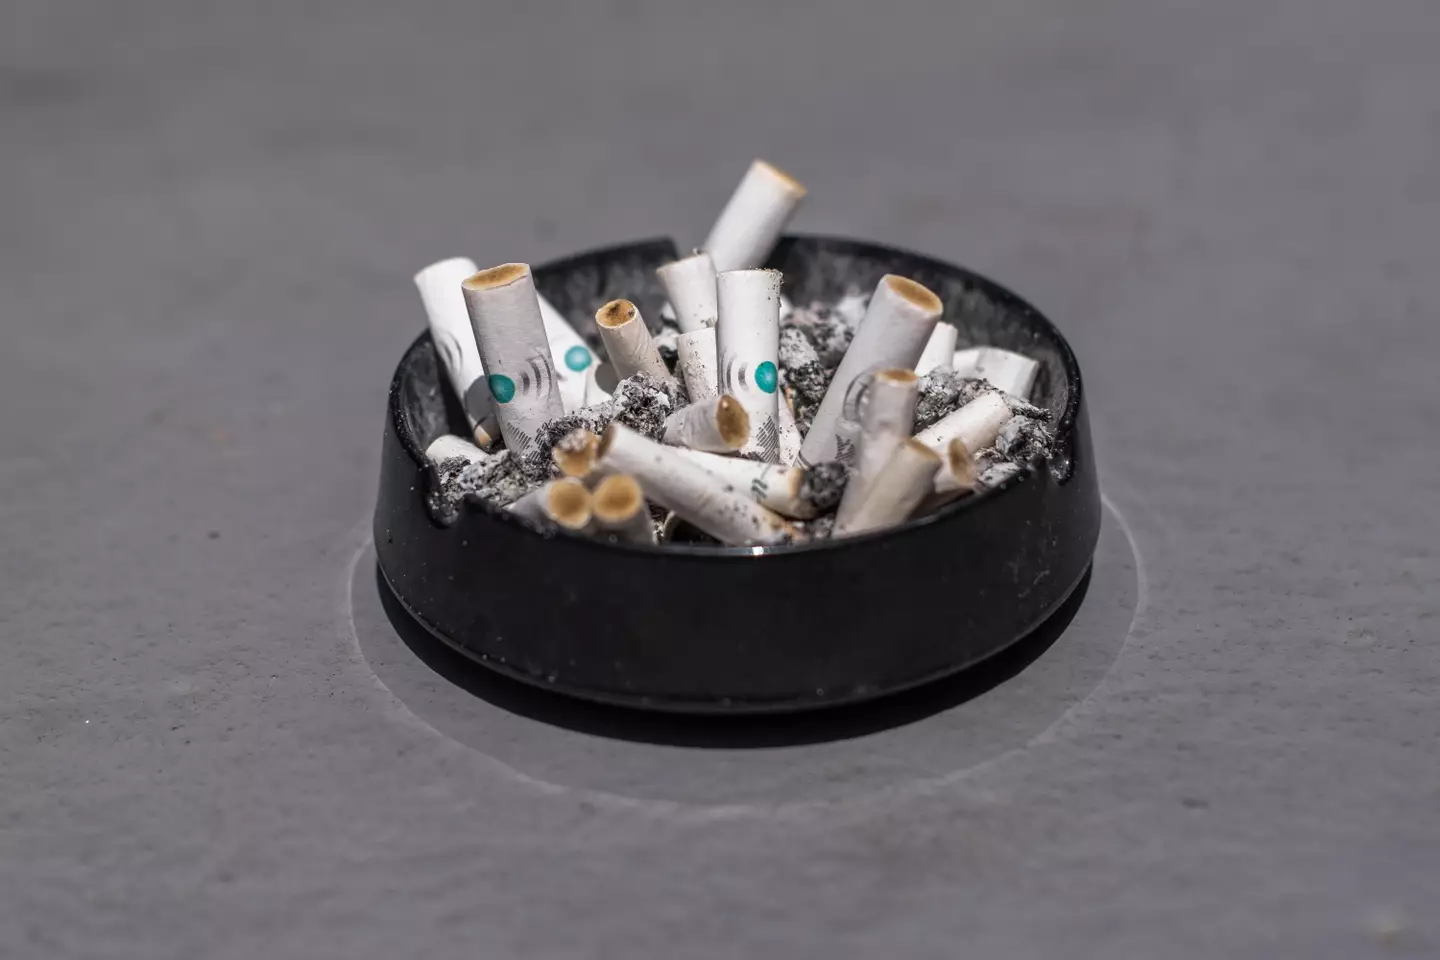 Menthol cigarettes are soon to be banned in the US.